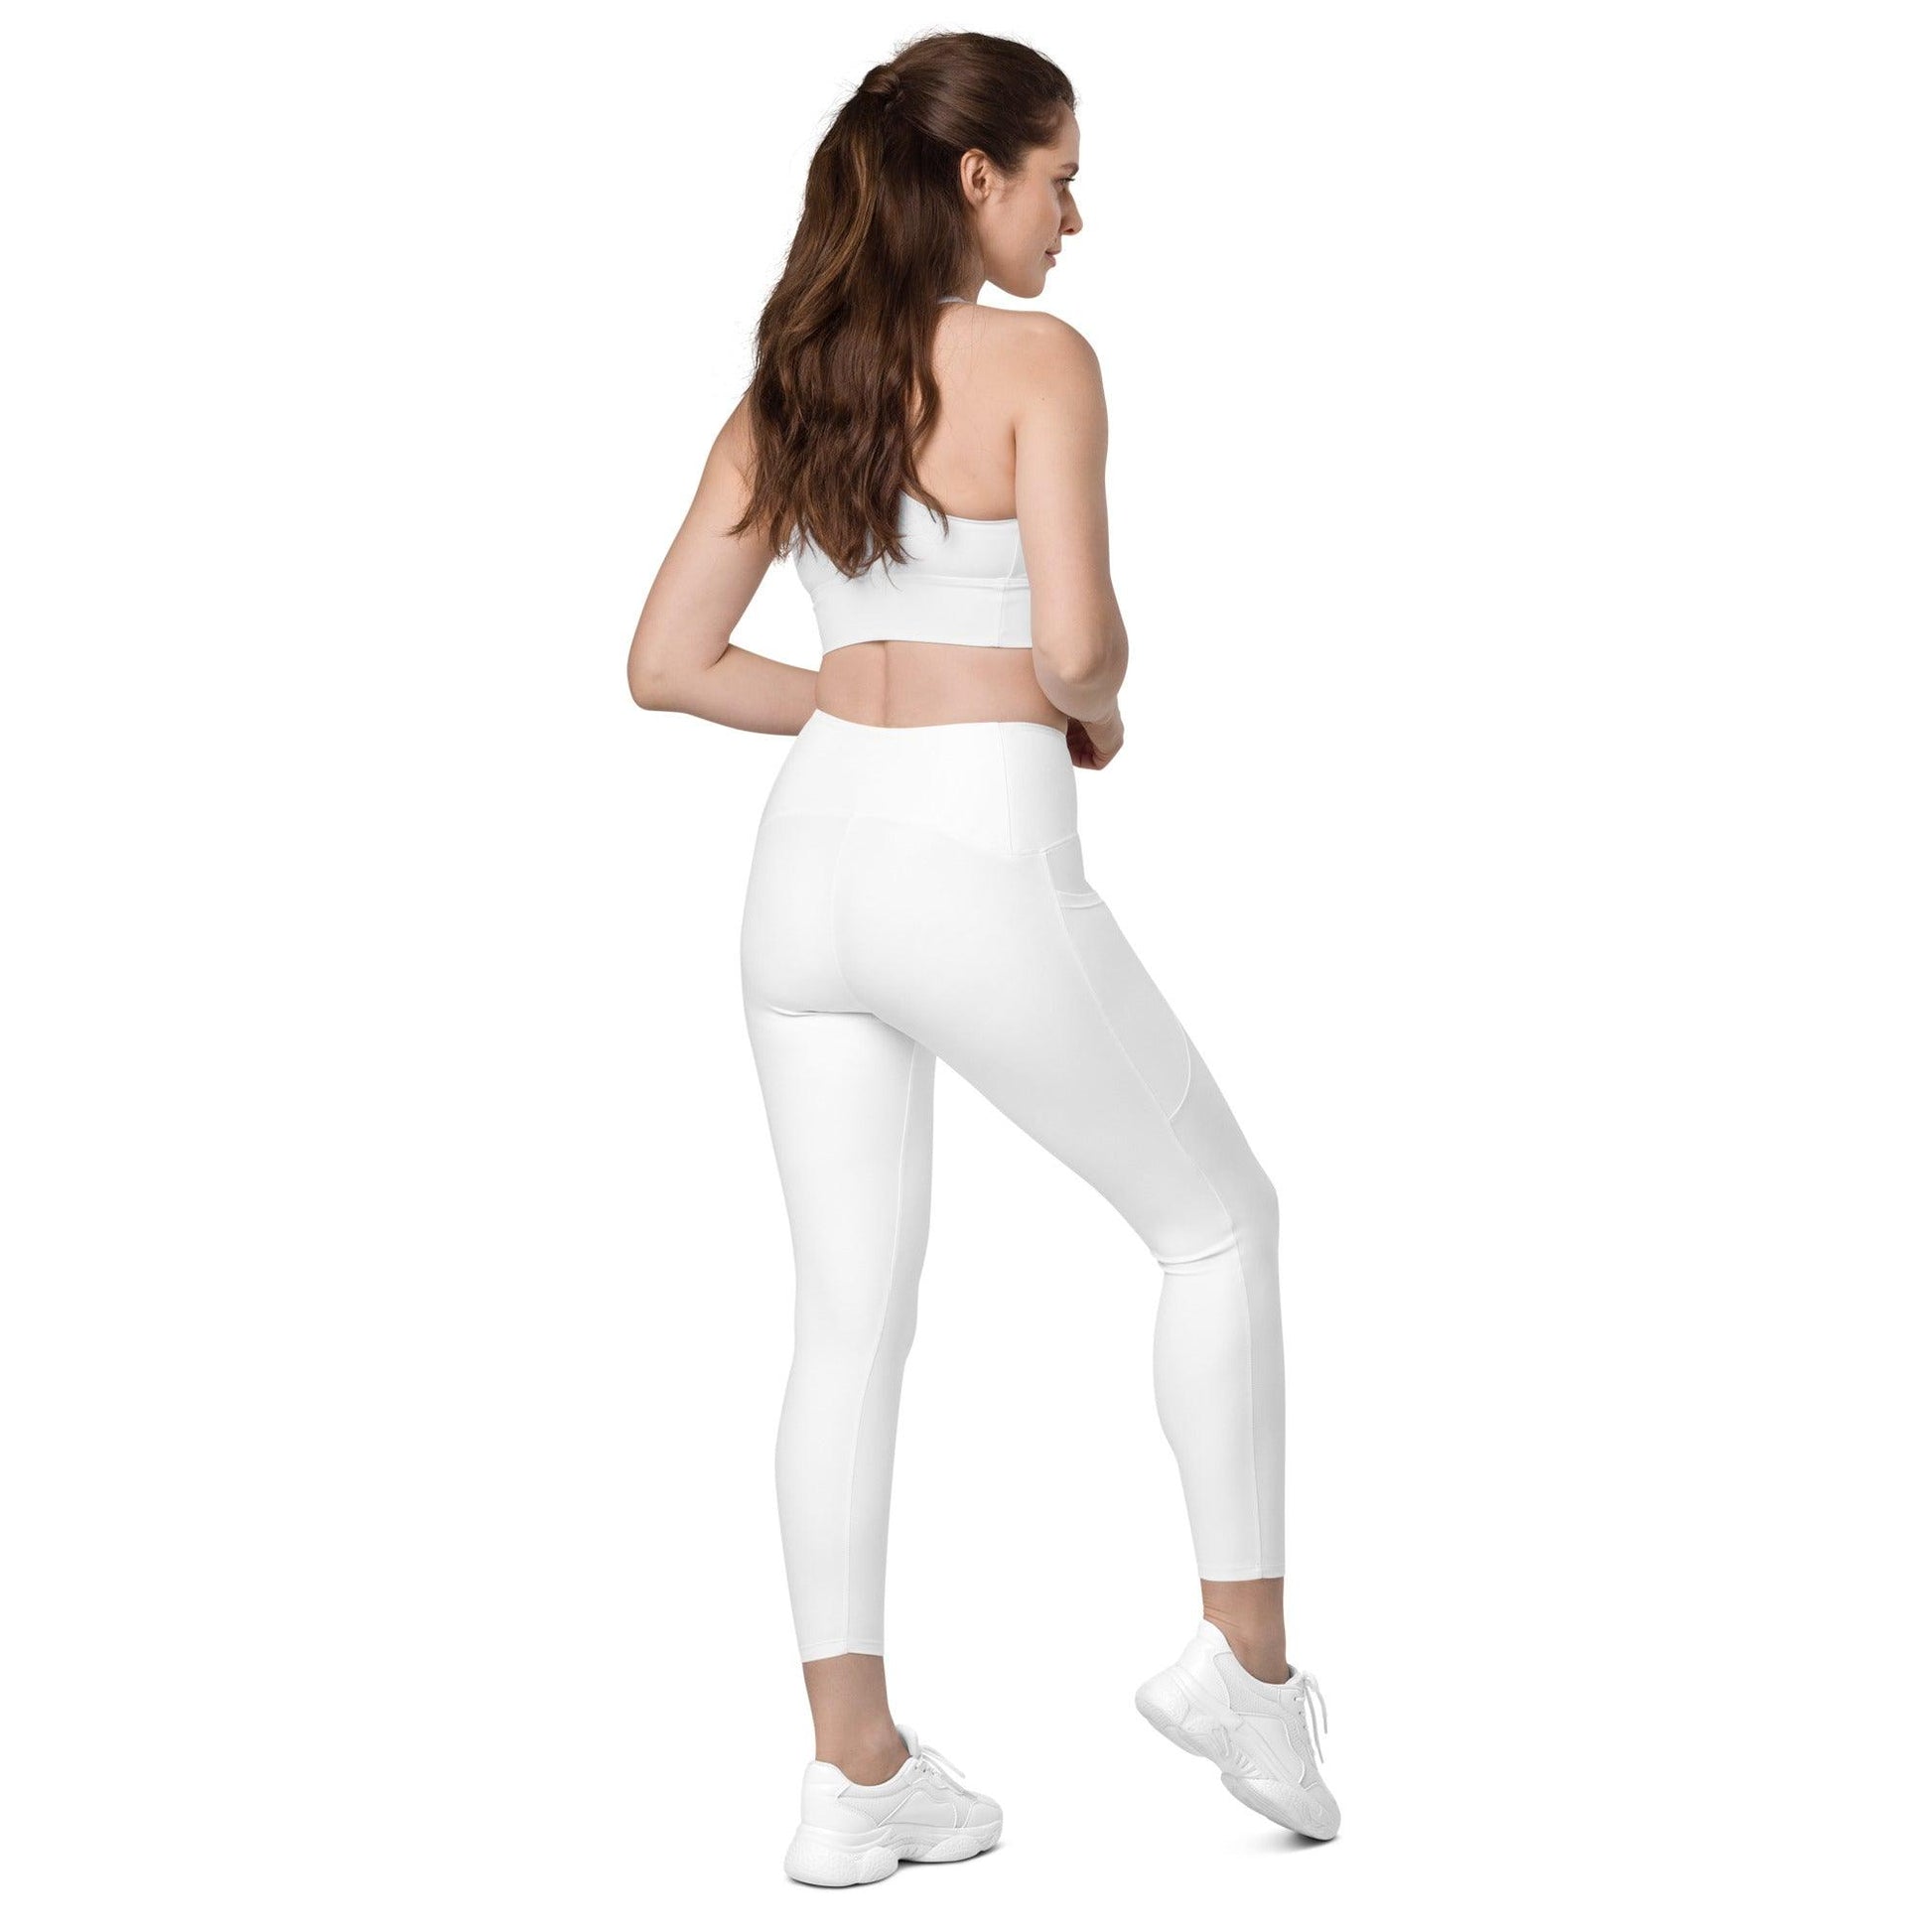 iSAW Womens White Leggings with Pockets - iSAW Company